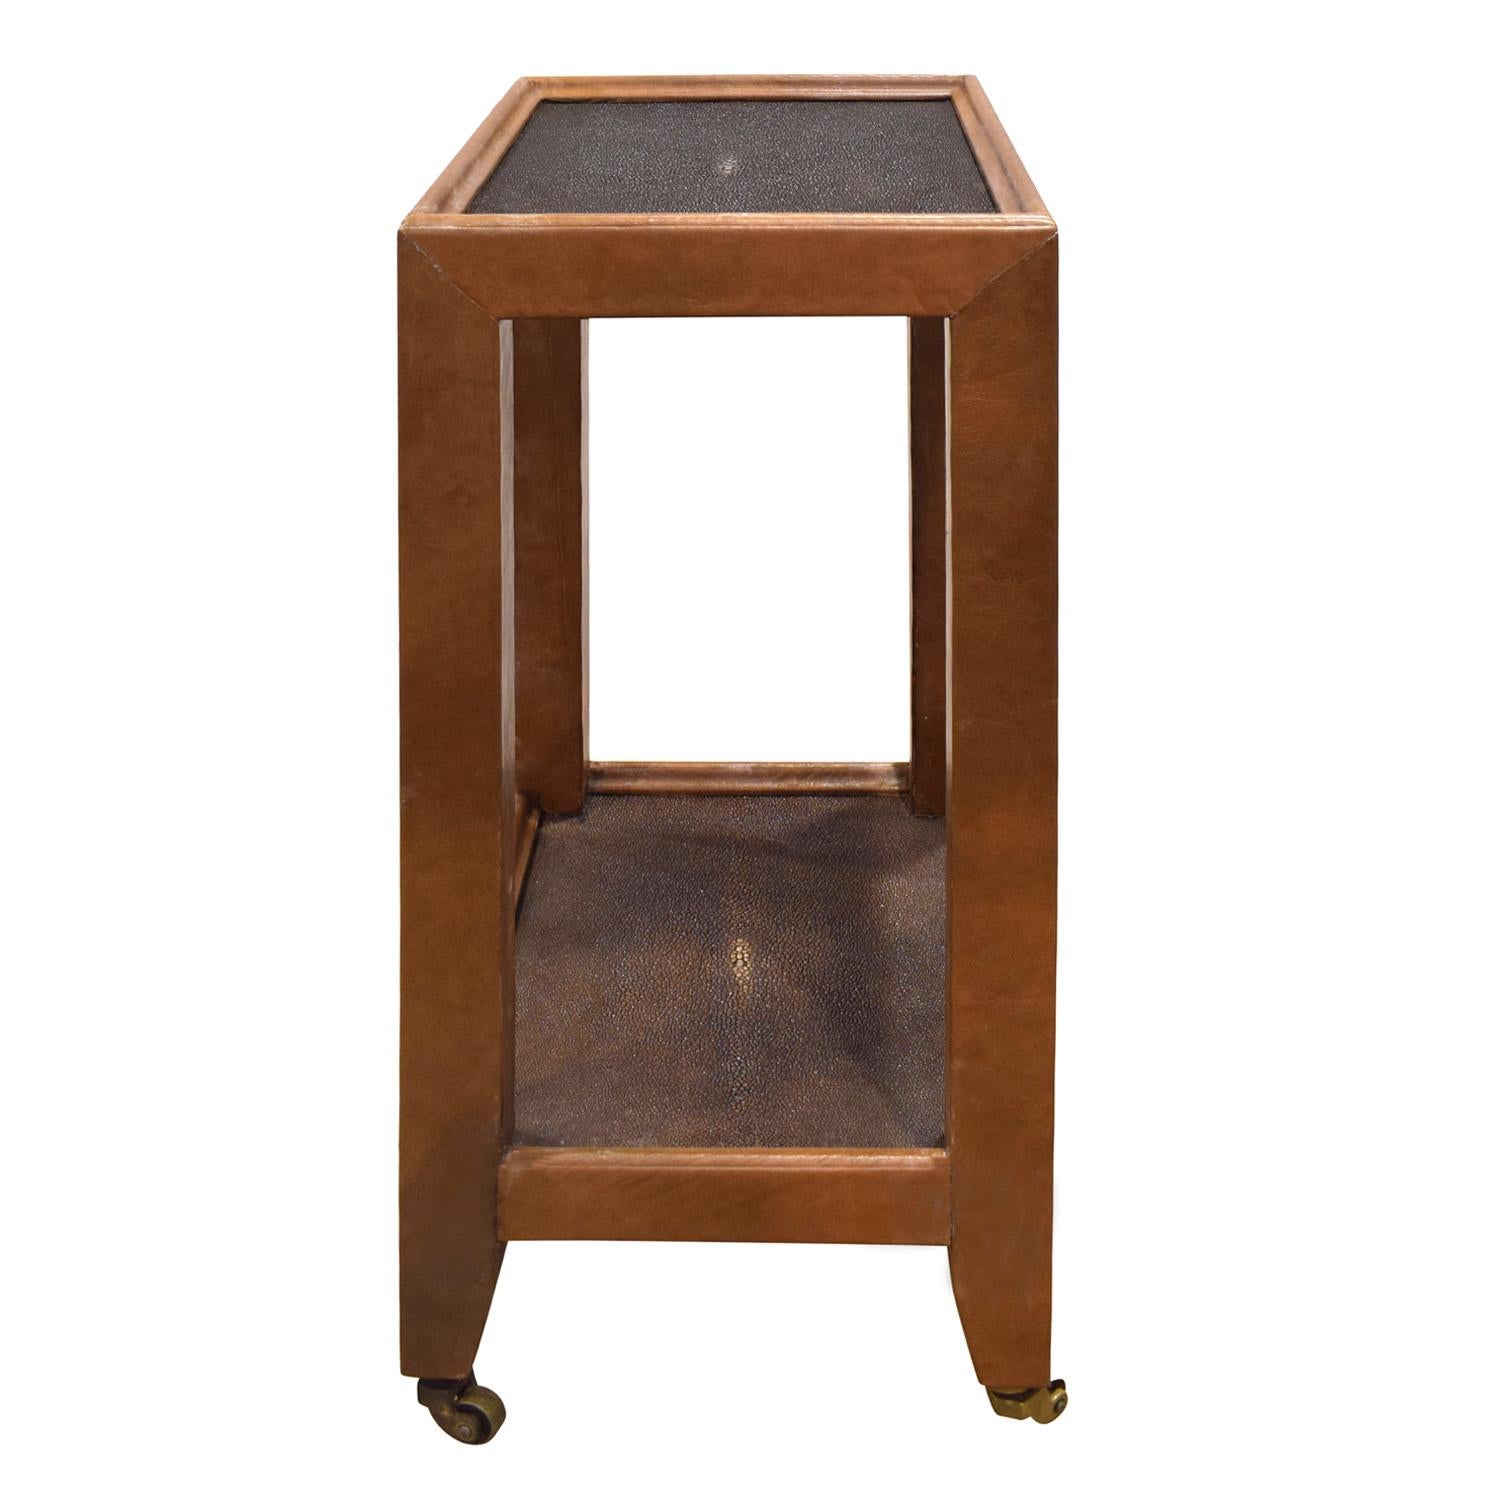 Exceptional Telephone Table style end table covered in brown leather with tops in dark brown shagreen on brass castors by Karl Springer, American 1980's. The bottom is covered in matching suede. The meticulous craftsmanship and fine material